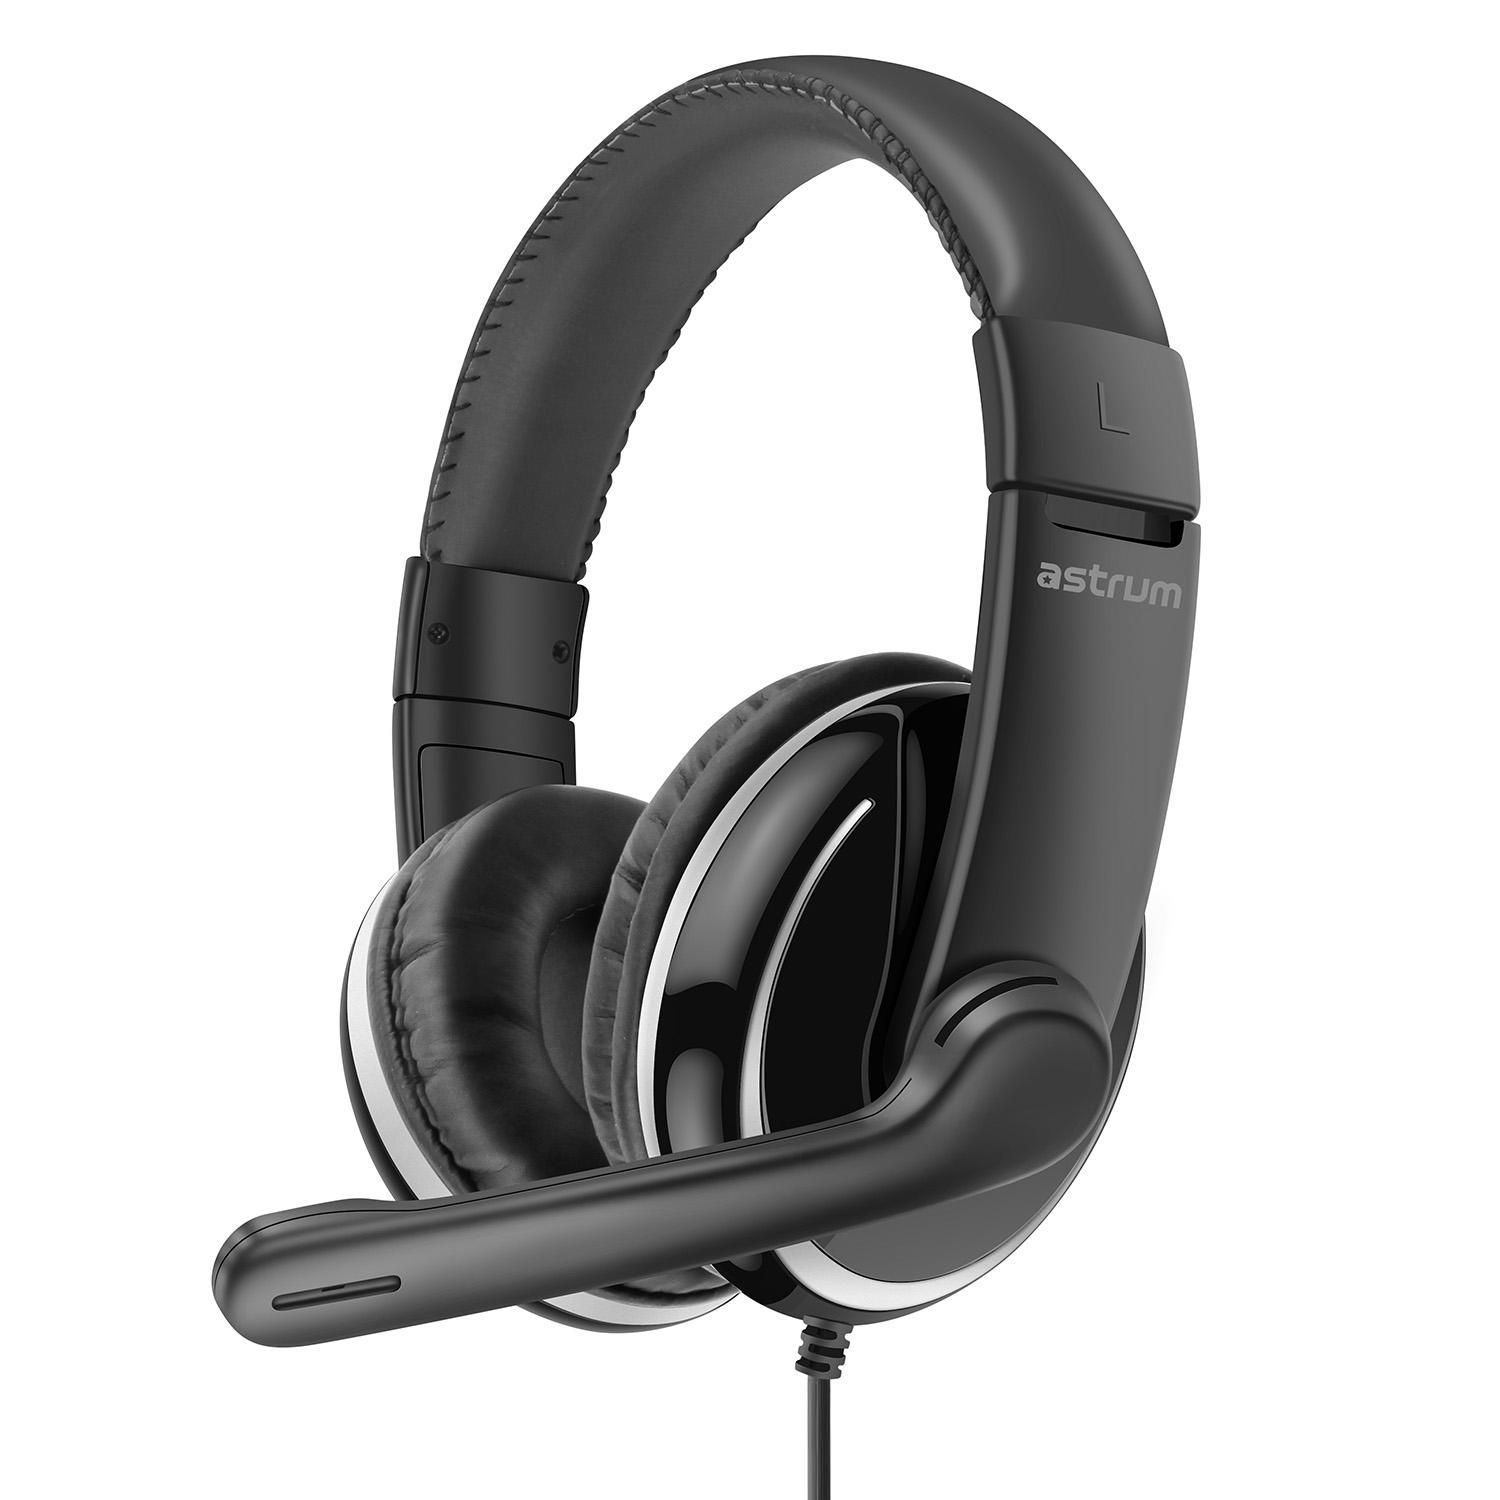 HS780 On-Ear USB Gaming Wired Headset with Mic